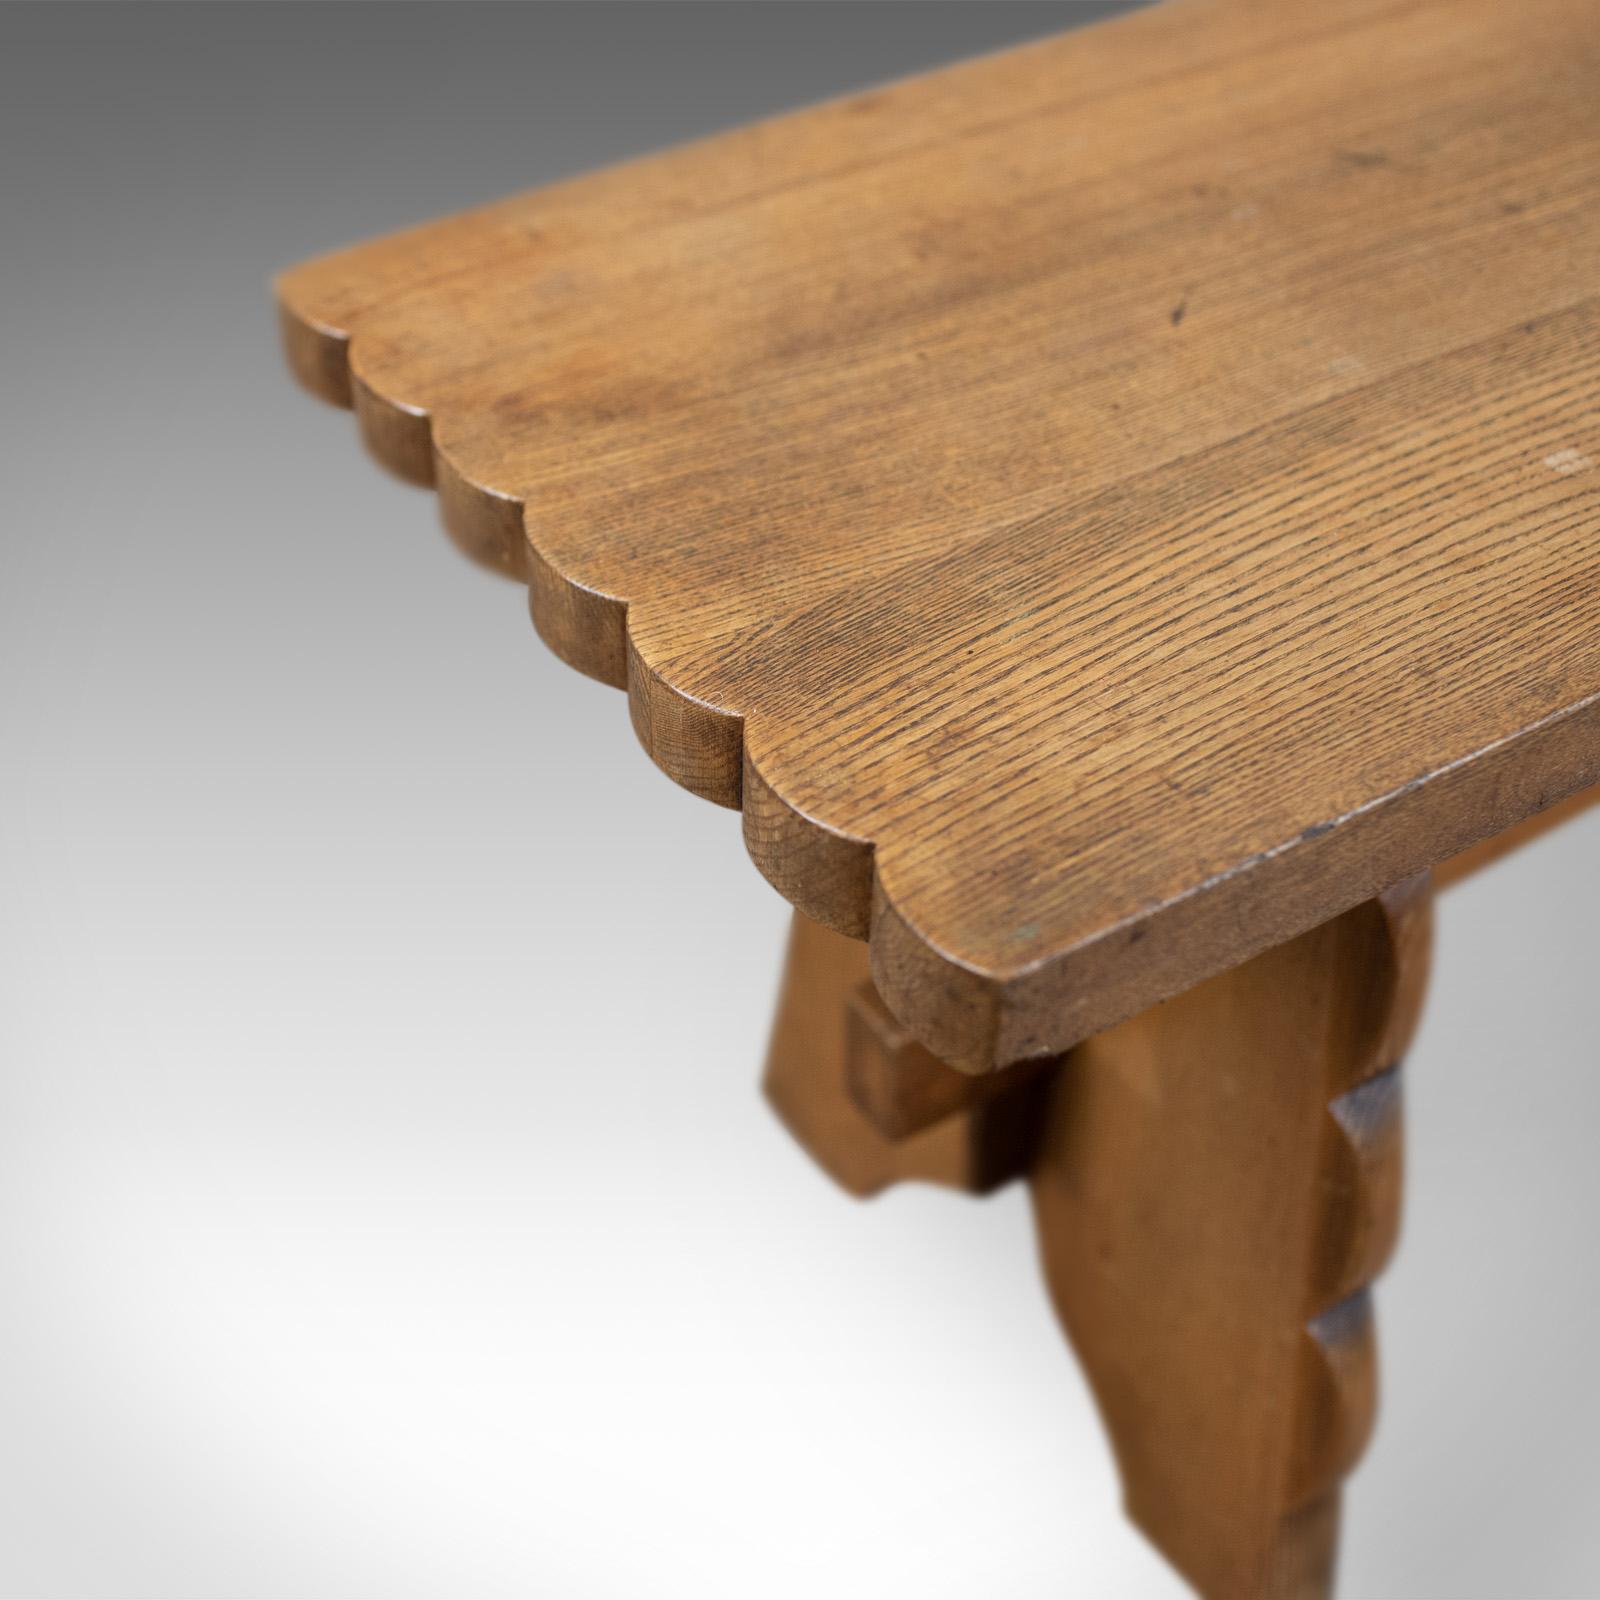 Arts and Crafts Arts & Crafts Oak Bench, English, Early 20th Century, Two-Seat Form